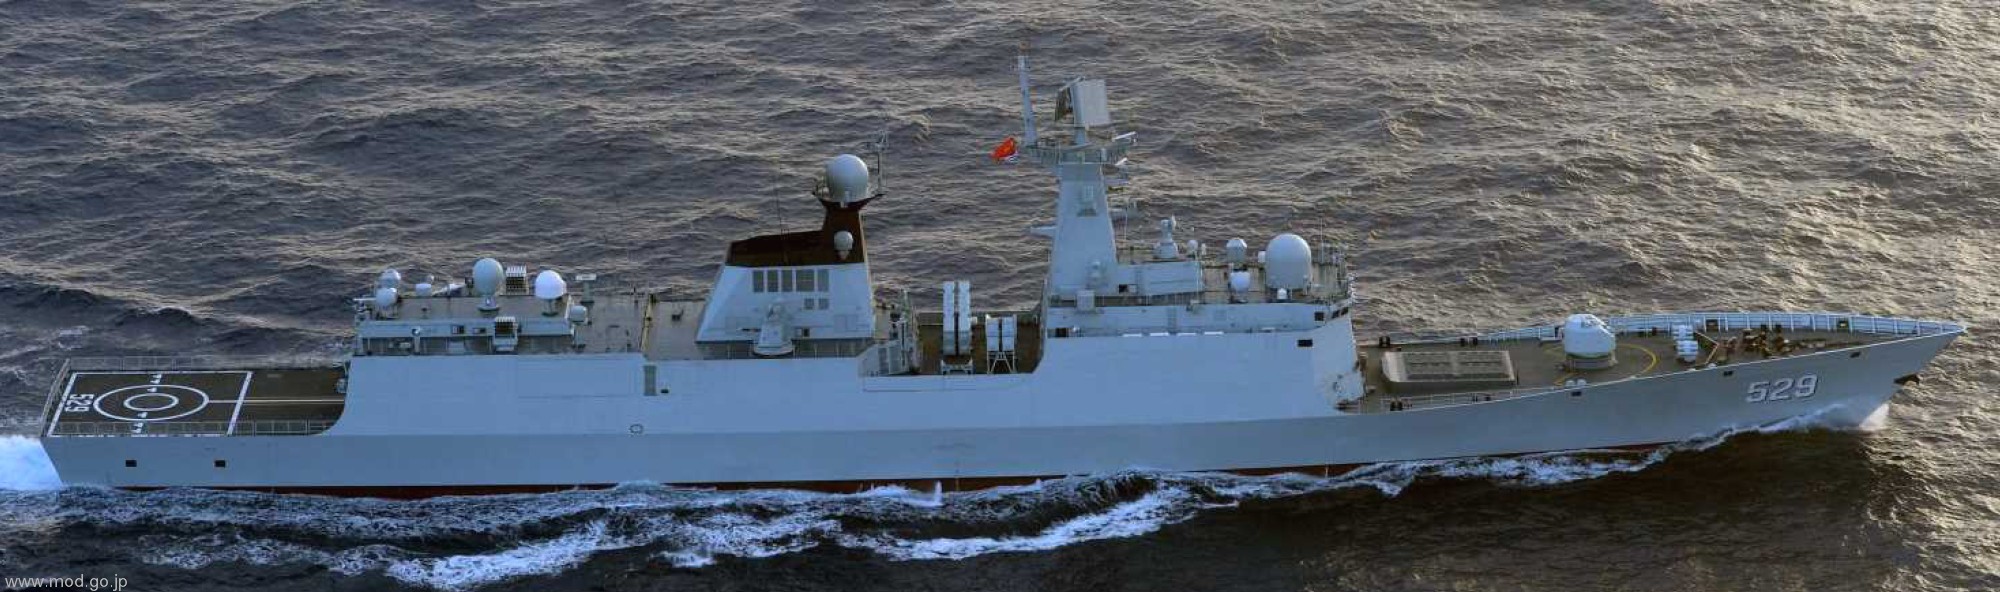 ffg-529 plans zhoushan type 054a jiangkai ii class guided missile frigate china people's liberation army navy 03